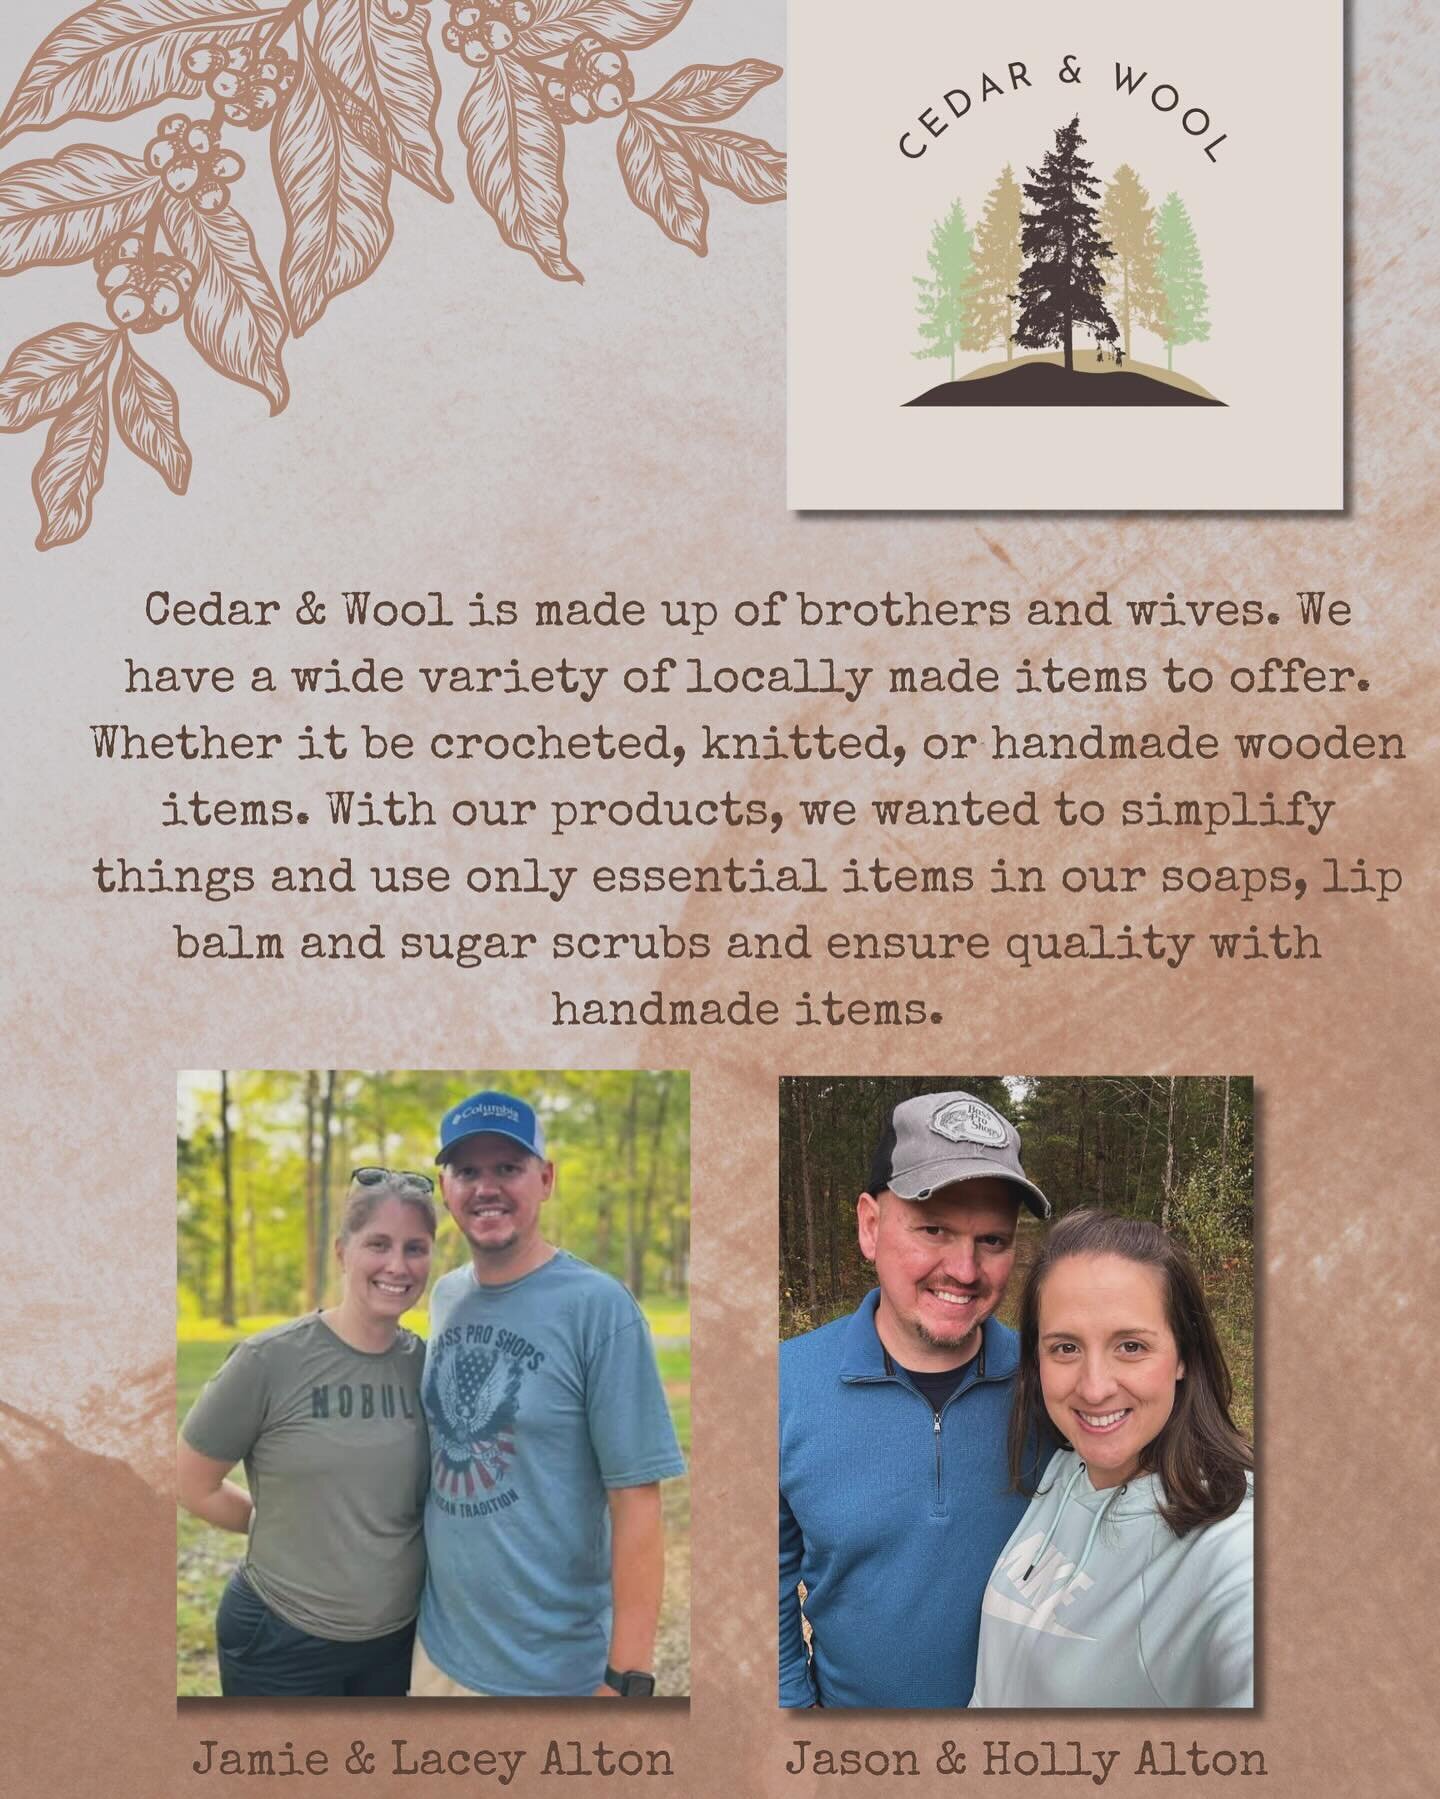 The Alton&rsquo;s are new to the shop this week! Come grab some last minute Christmas gifts from Cedar &amp; Wool! So local that they can tell you which trees they cut to make their keepsake boxes!